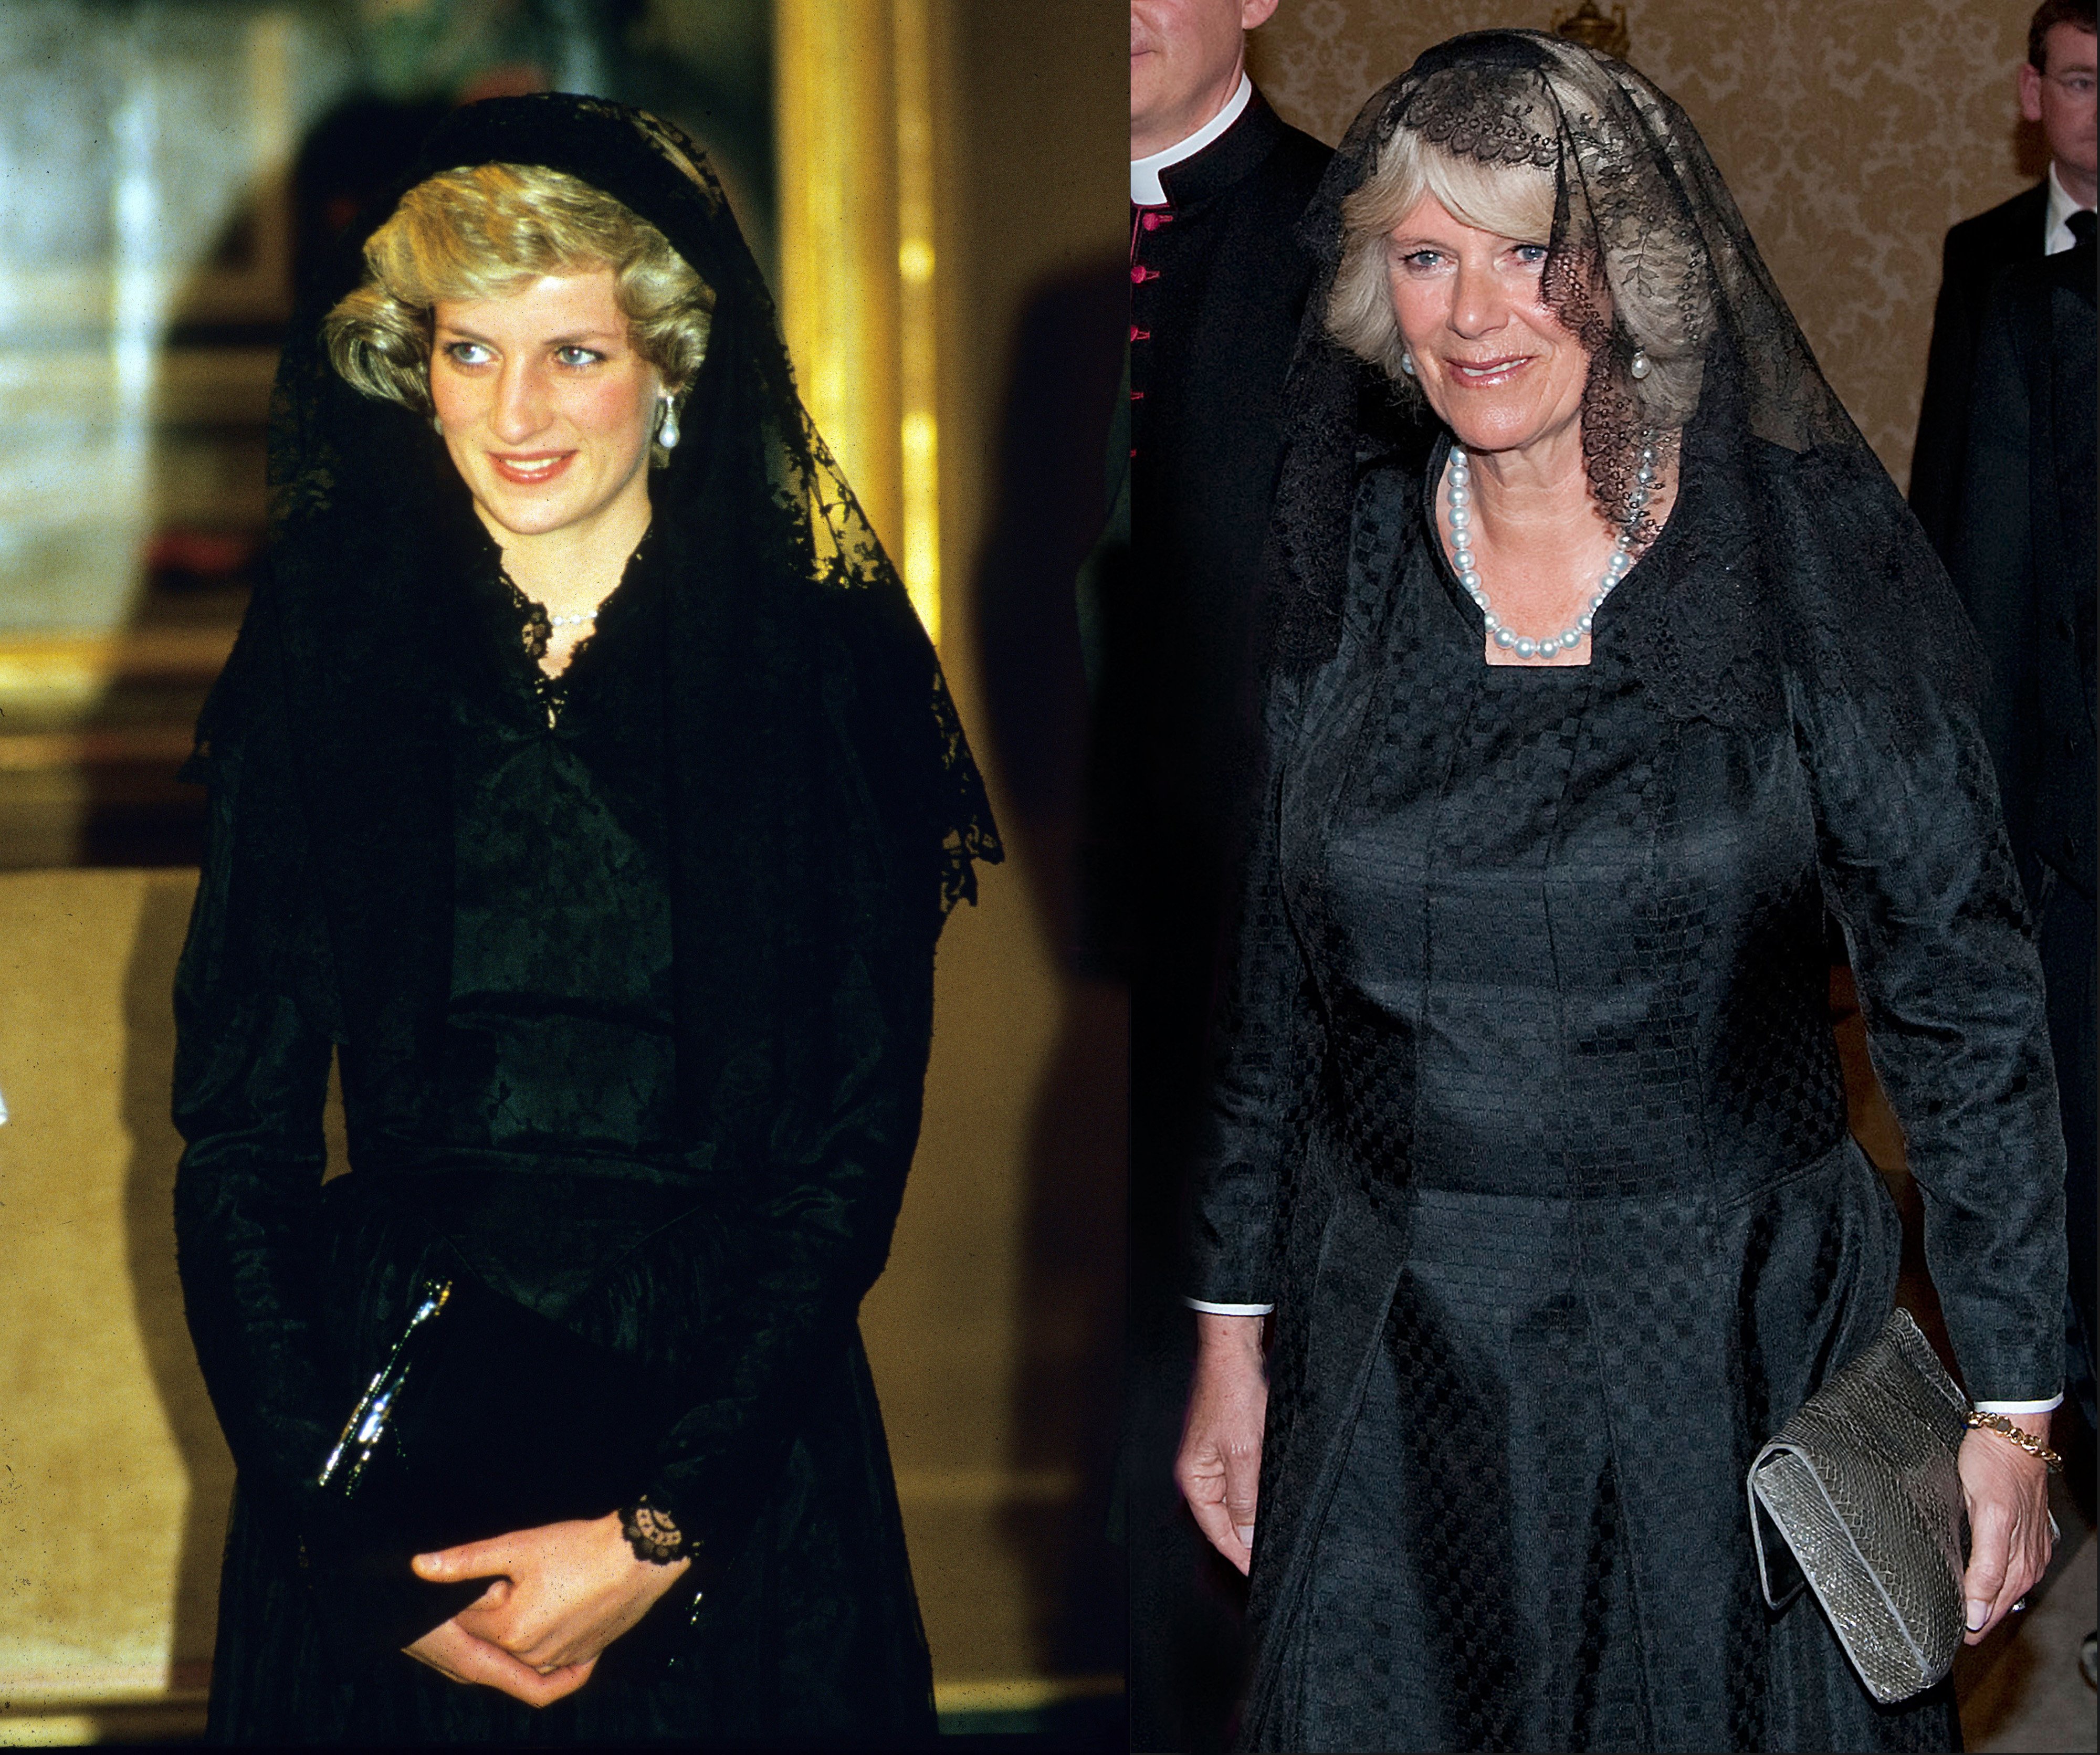 Composite image comparison between Princess Diana as she arrives at the Vatican in April 1985 and Camilla, Duchess of Cornwall meeting Pope Benedict XVI at St. Peter's Basilica on April 27, 2009 in Vatican City, the Vatican | Source: Getty Images